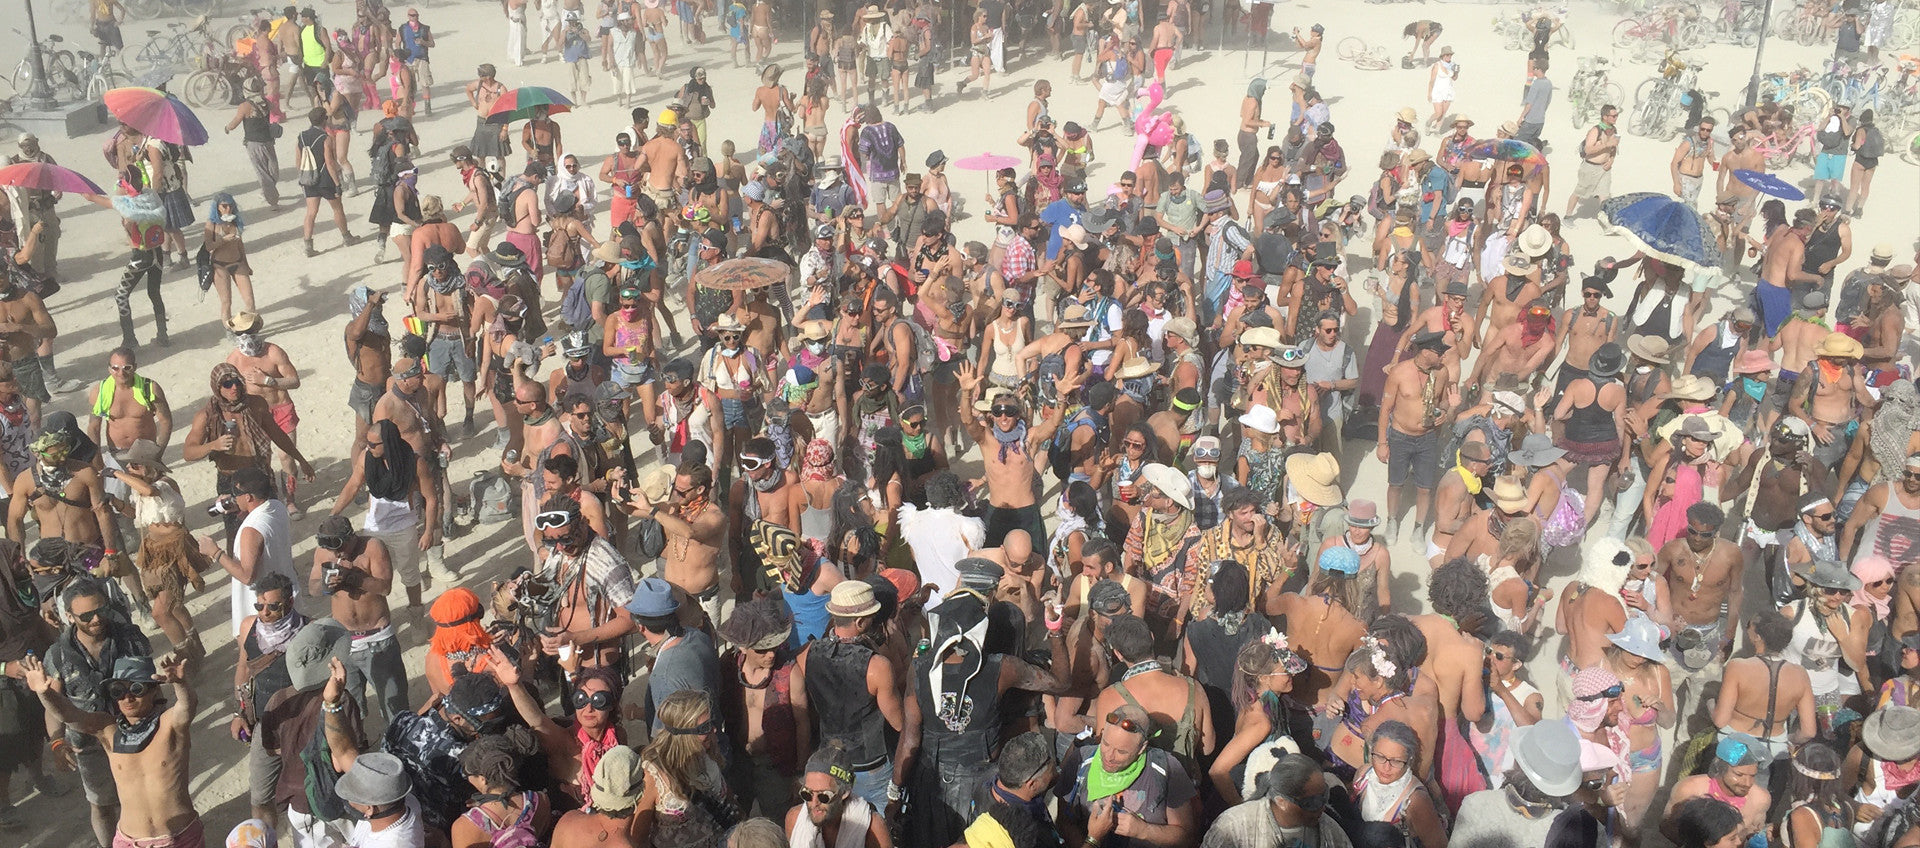 Where's Waldo? And How Did He Get Tickets to Burning Man?!